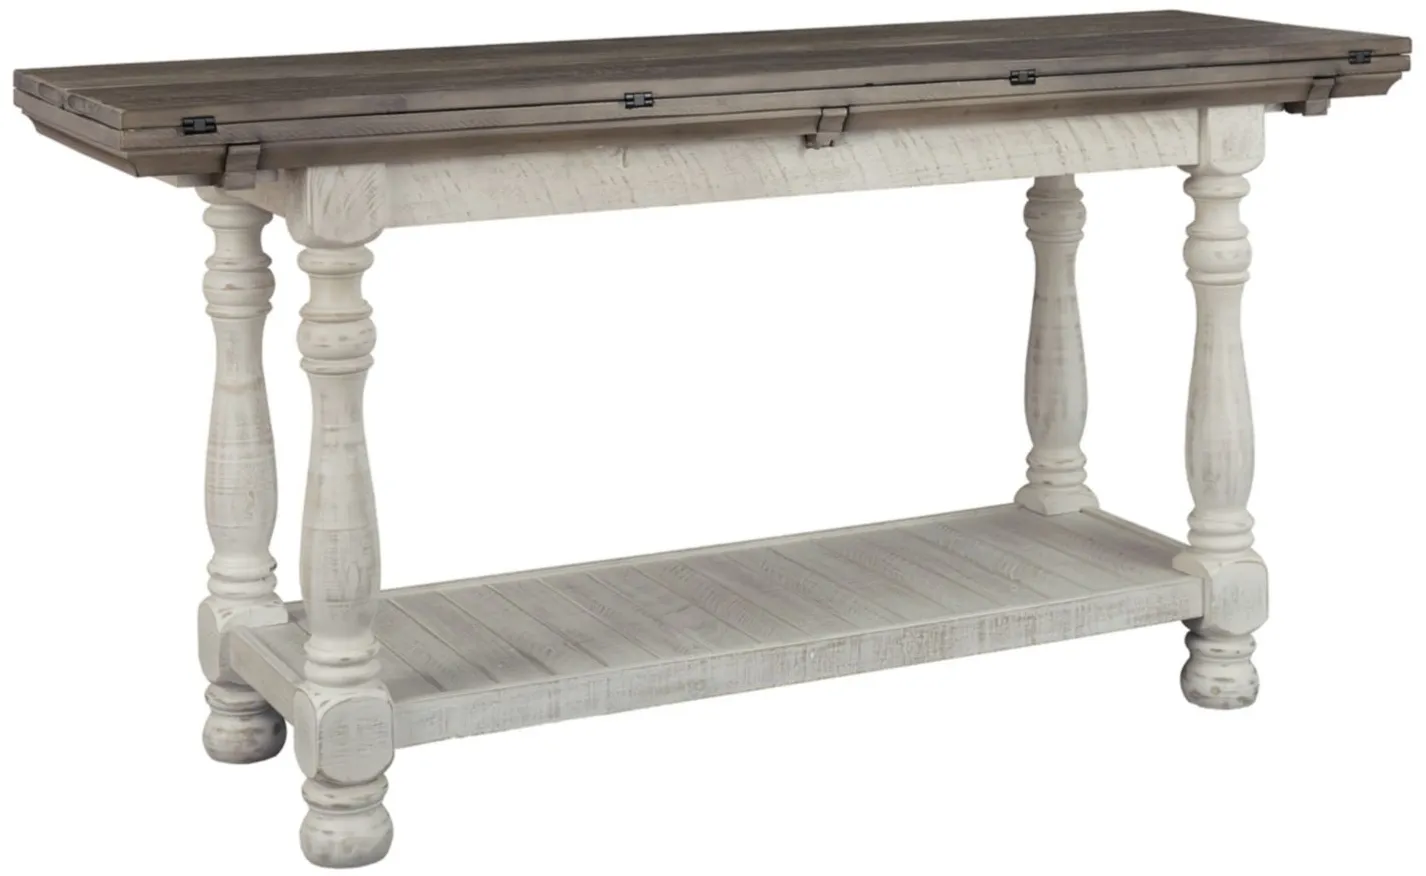 Havalance Casual Flip Top Sofa Table in Gray/White by Ashley Express